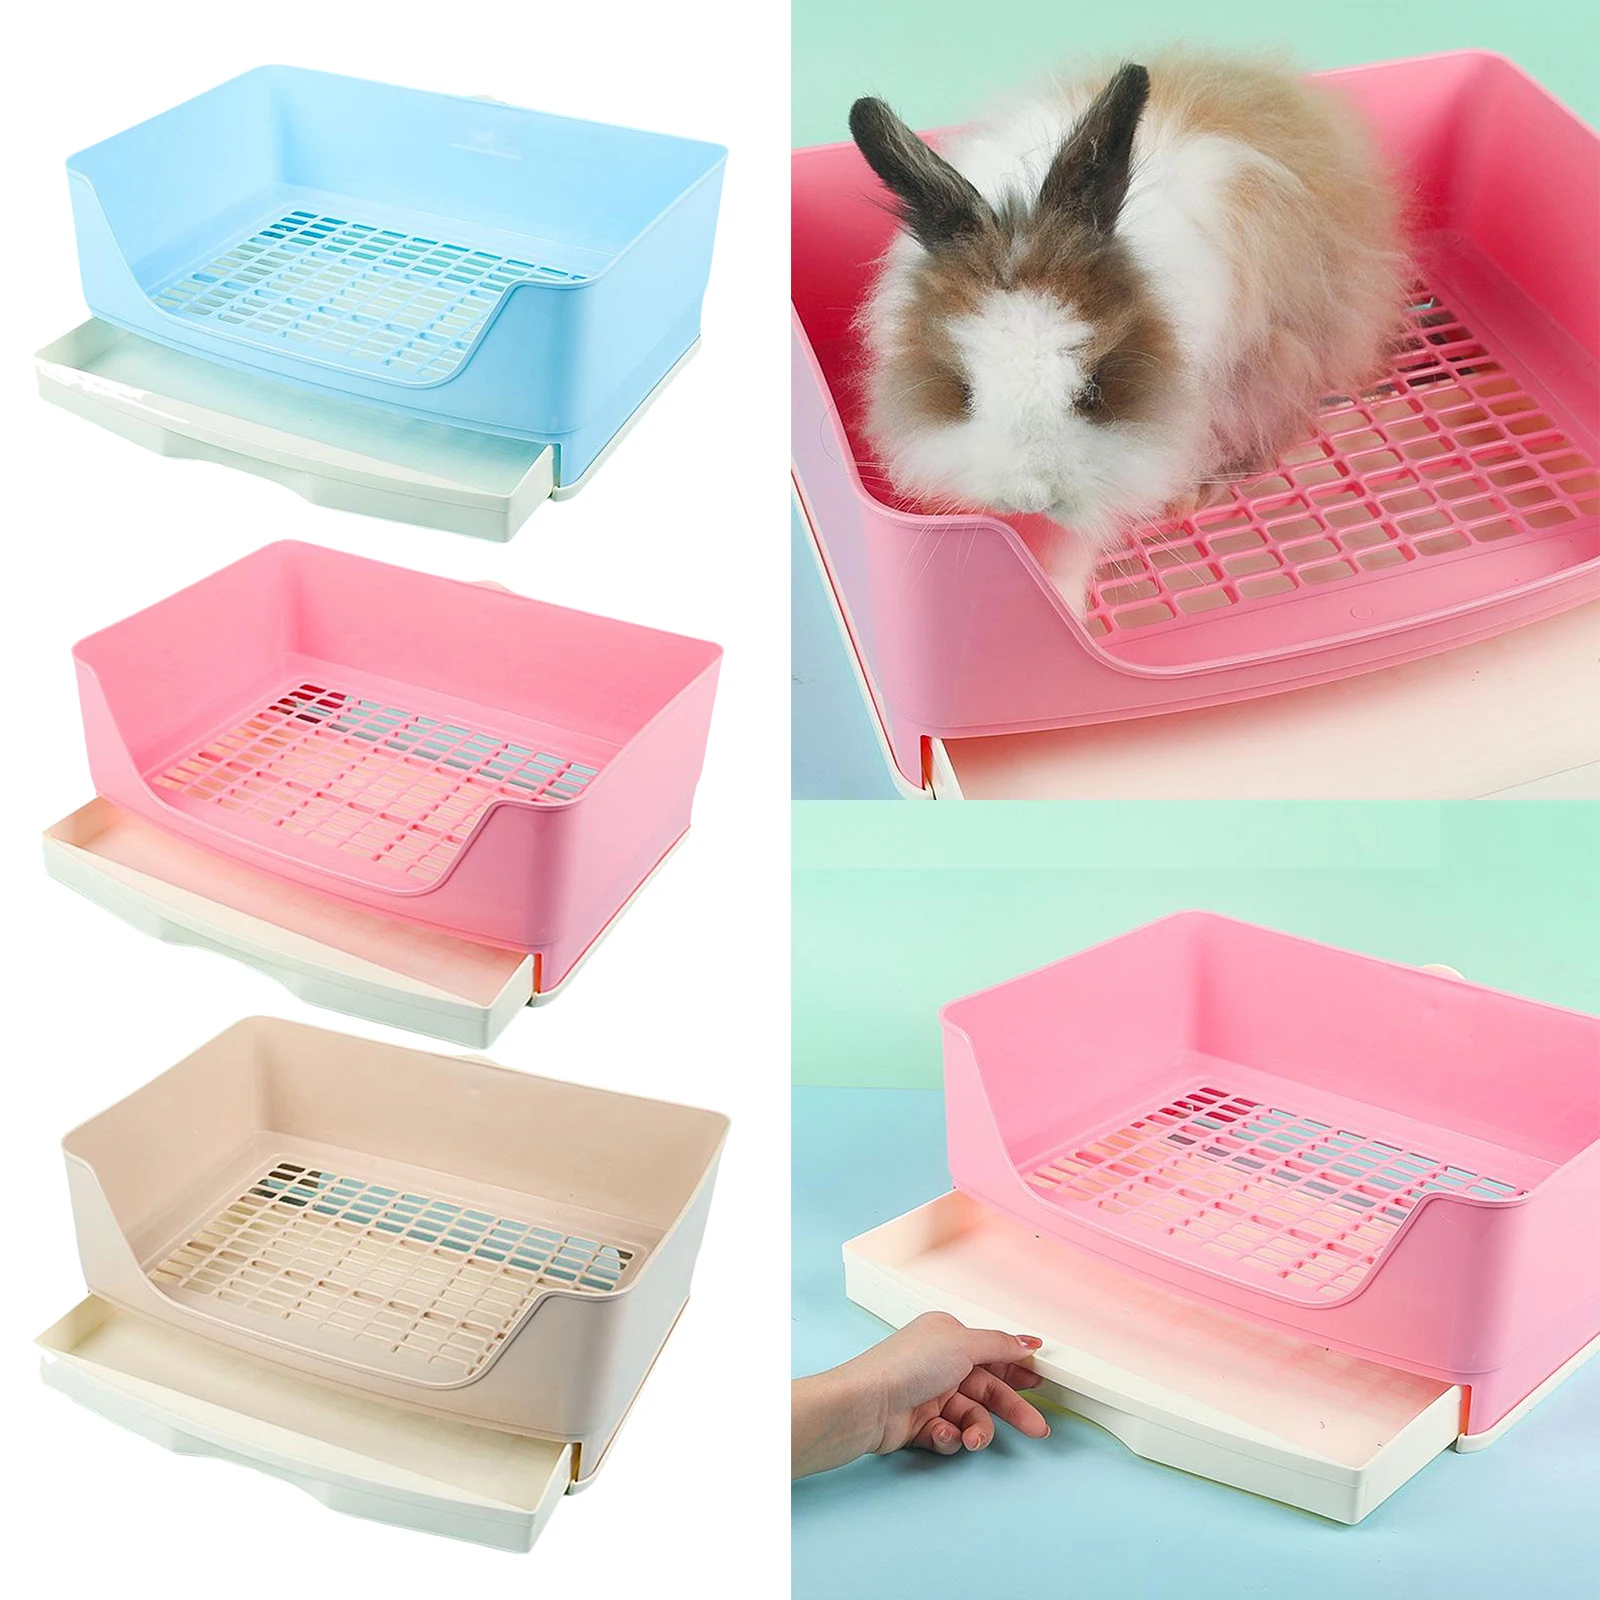 2 Layers Rabbit Cage Litter Box Potty Trainer Exercise for Guinea Pig Small Pet